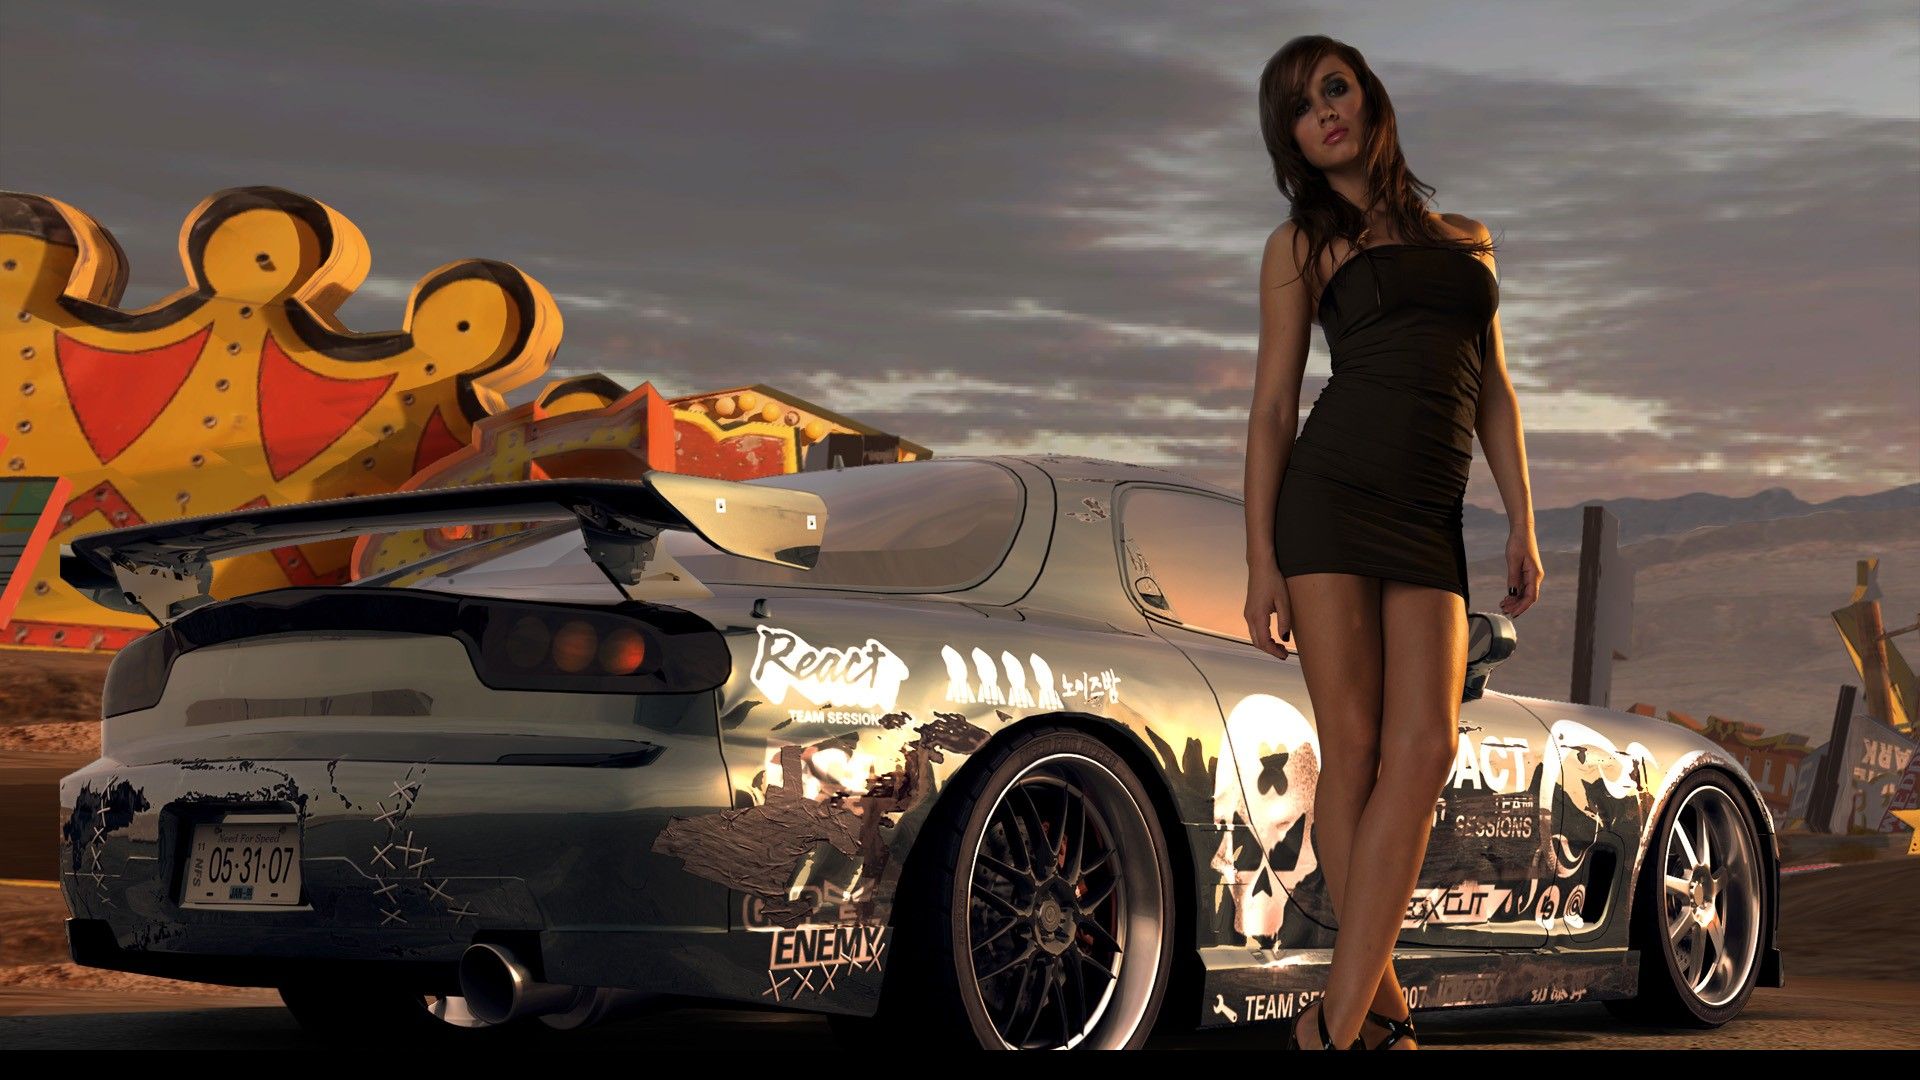 Need for speed wallpapers